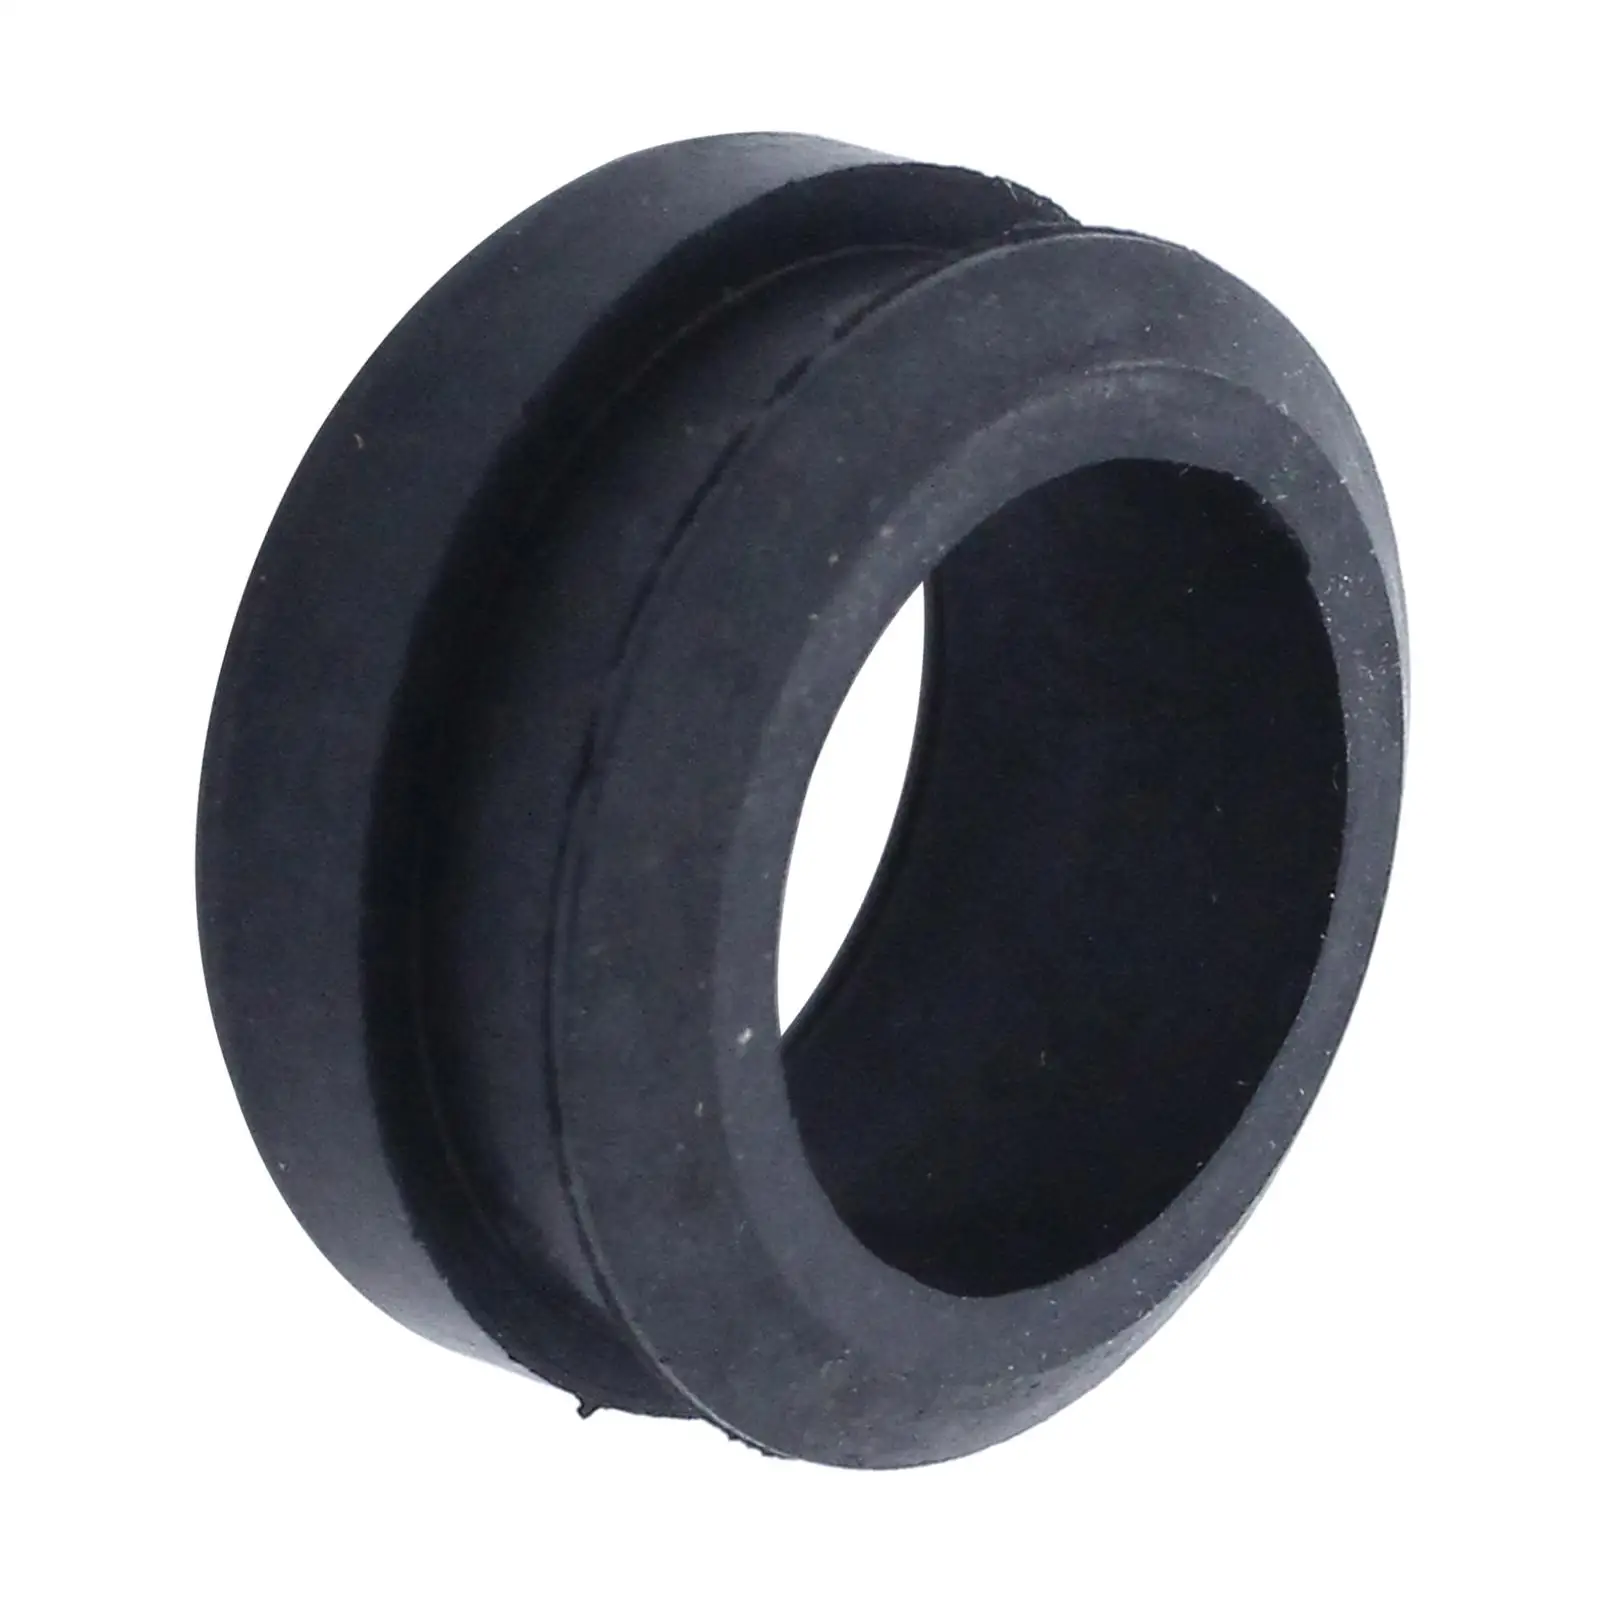 Rubber Breather Grommets, Cover Grommets, O.D. 1 1/4